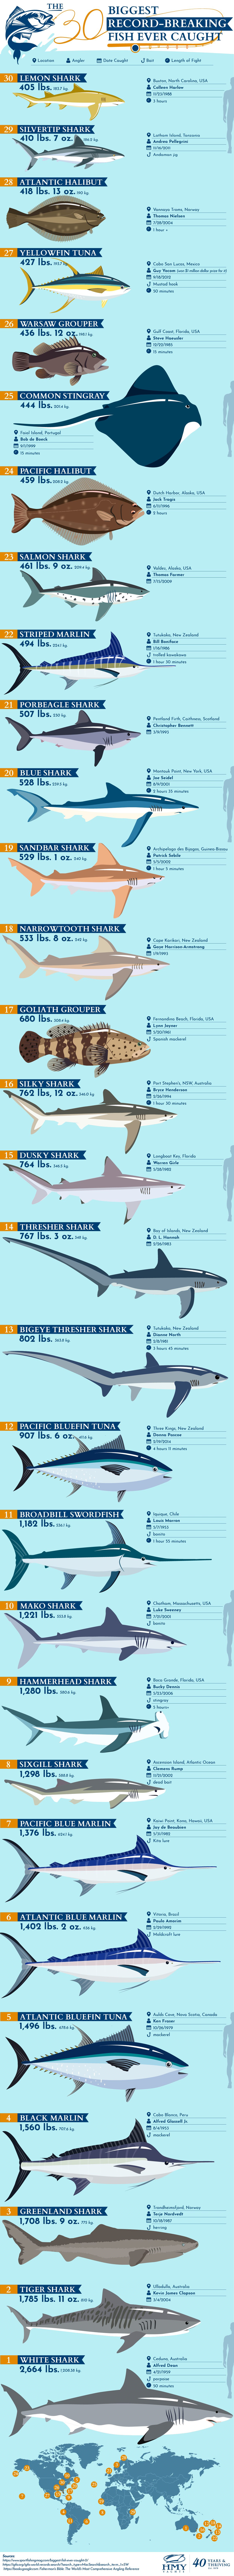 The 30 Biggest Record-Breaking Fish Ever Caught - HMY.com - Infographic